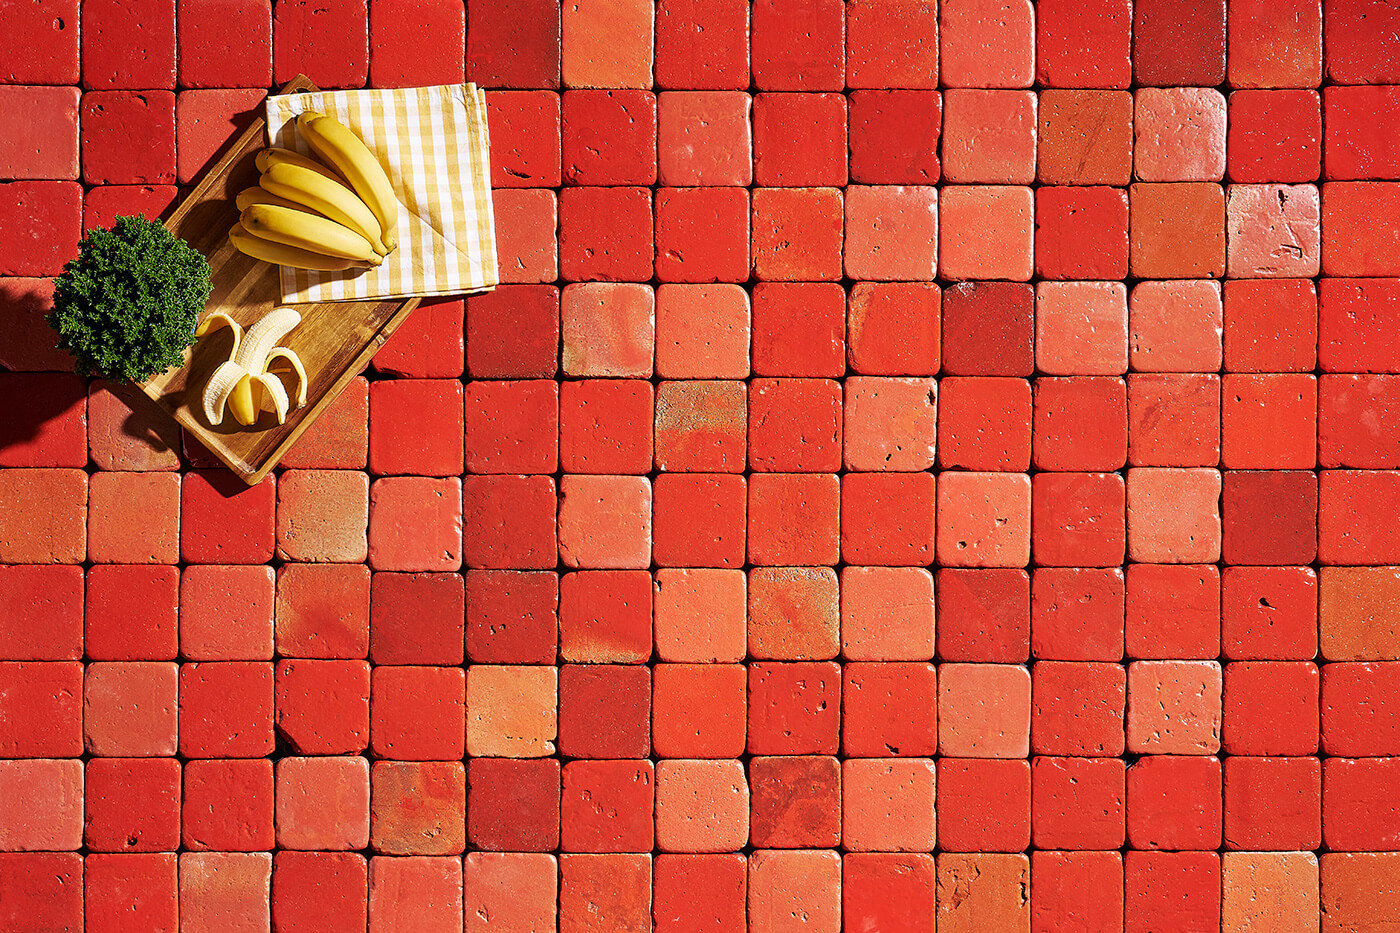 picture of a terracotta floor made of red tiles